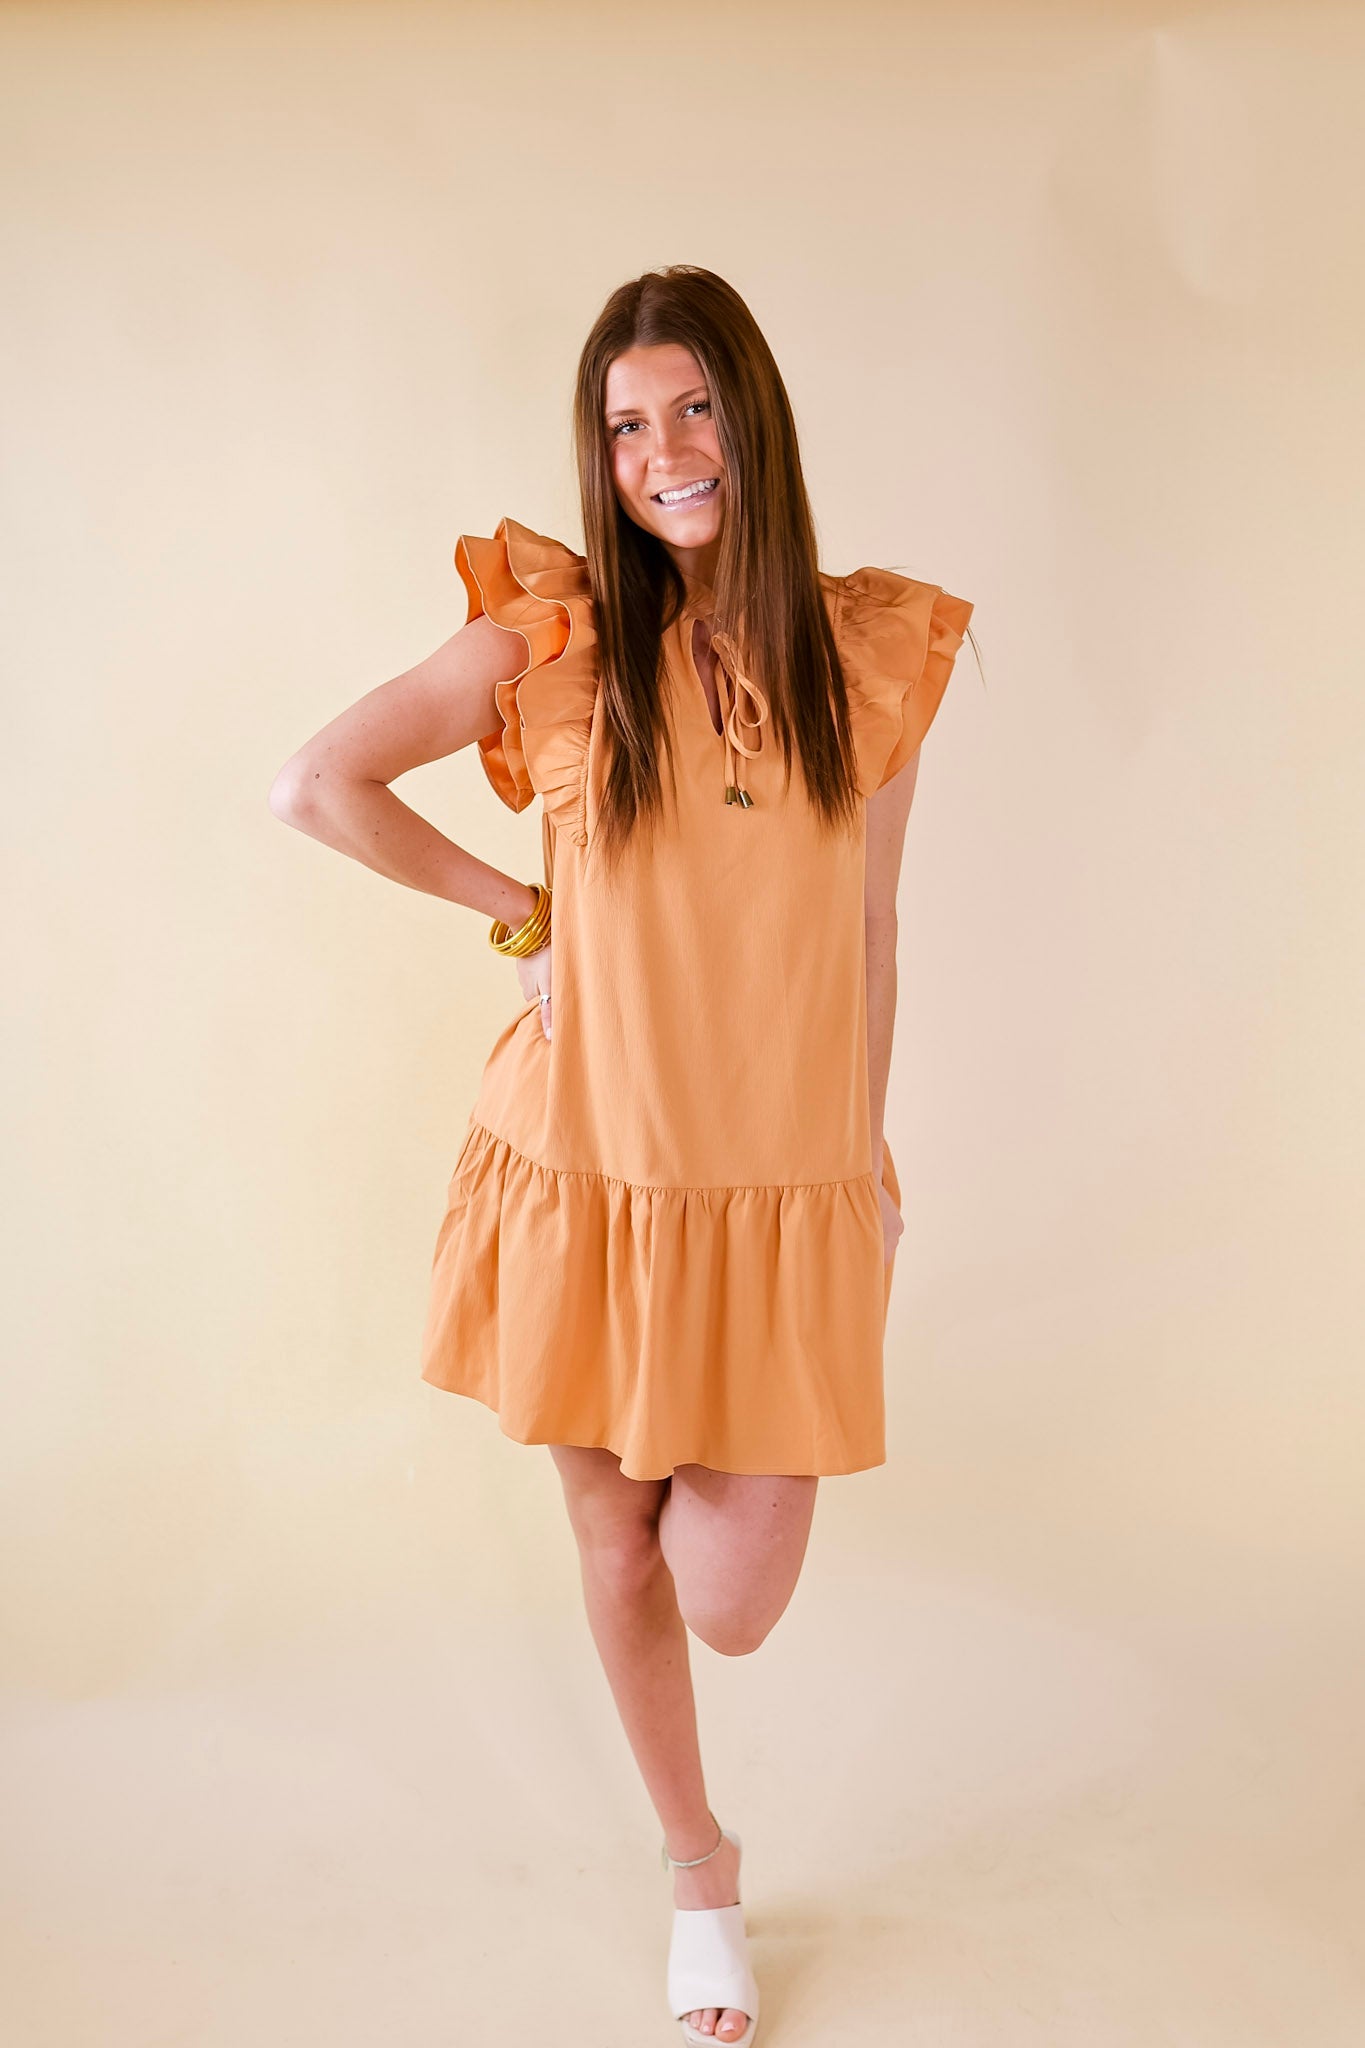 Powerful Love Ruffle Cap Sleeve Dress with Keyhole and Tie Neckline in Sunset Orange - Giddy Up Glamour Boutique